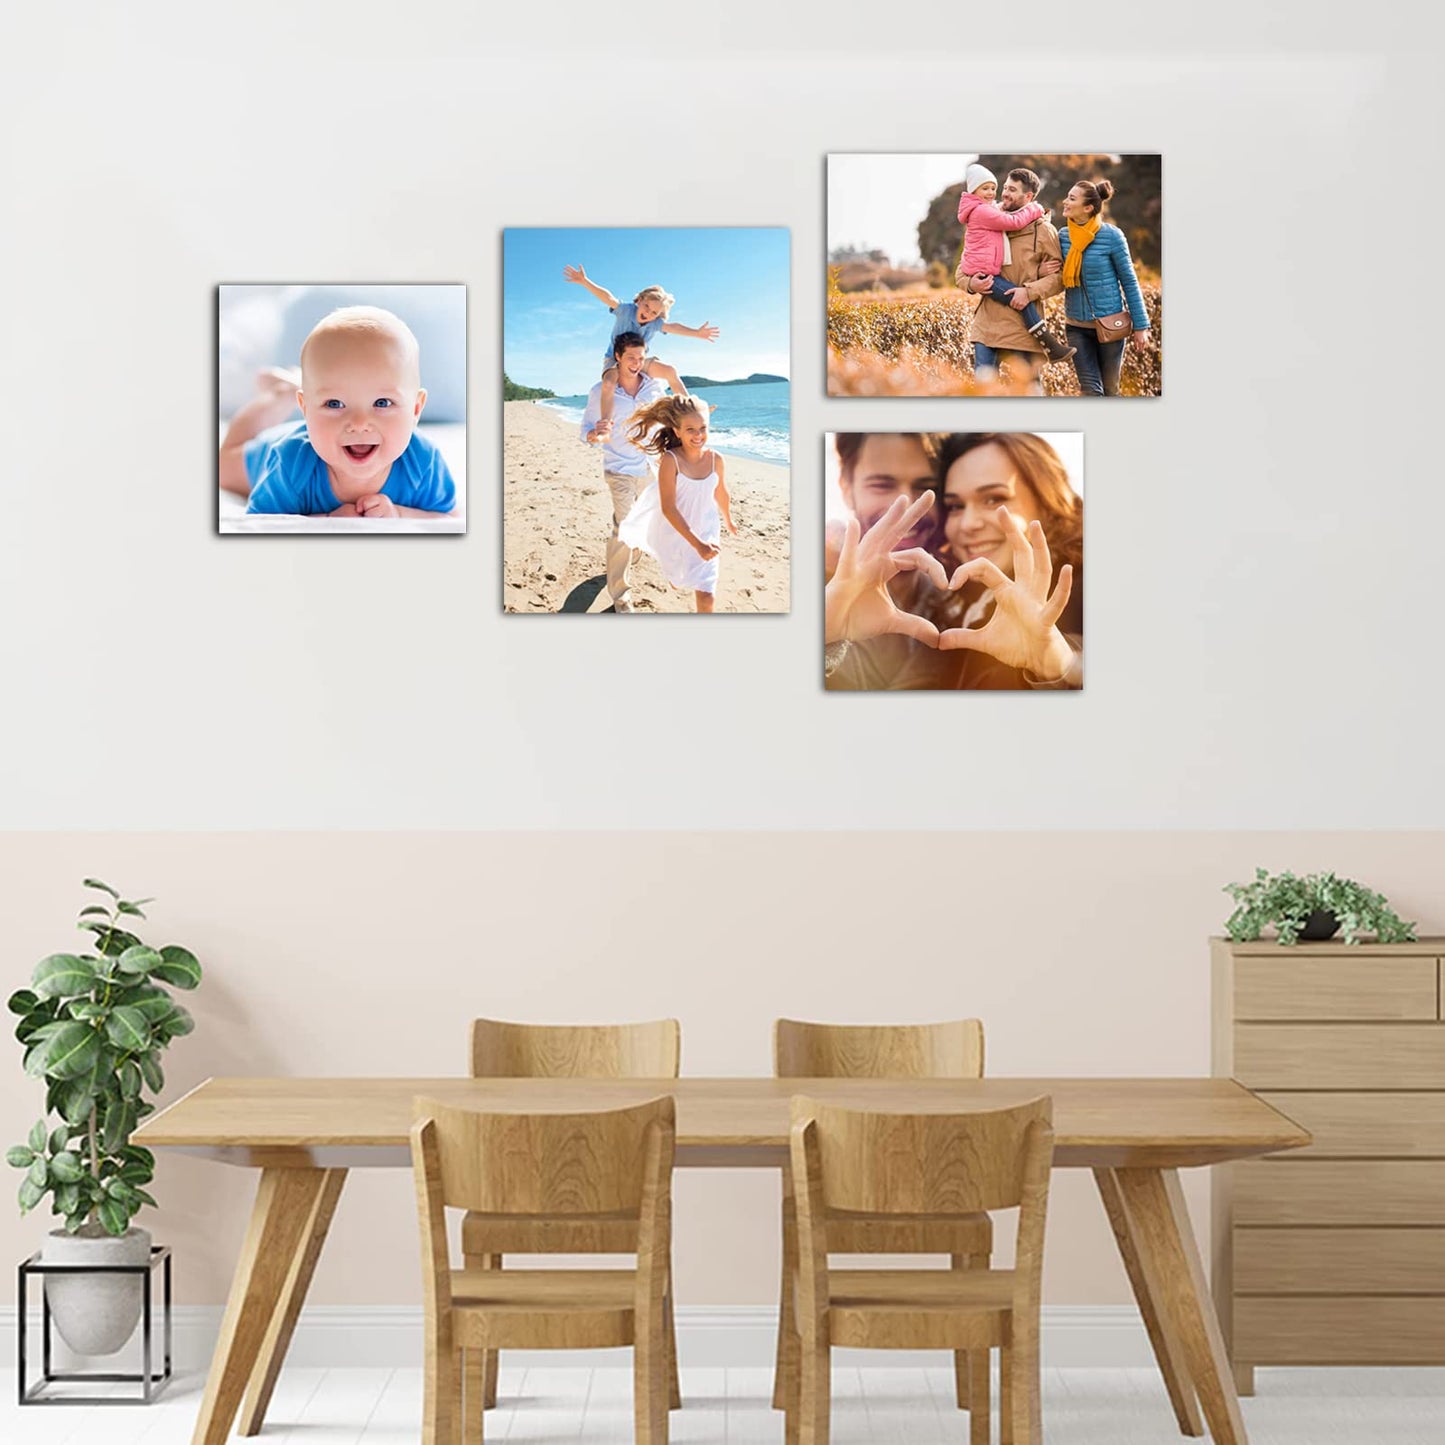 QIXIANG Custom Canvas Prints Baby Photo Frame 8"x8" Personalized Customized Family Picture Poster for Room Decor Ready to Hang (8"x8"(20x20cm) Frame)